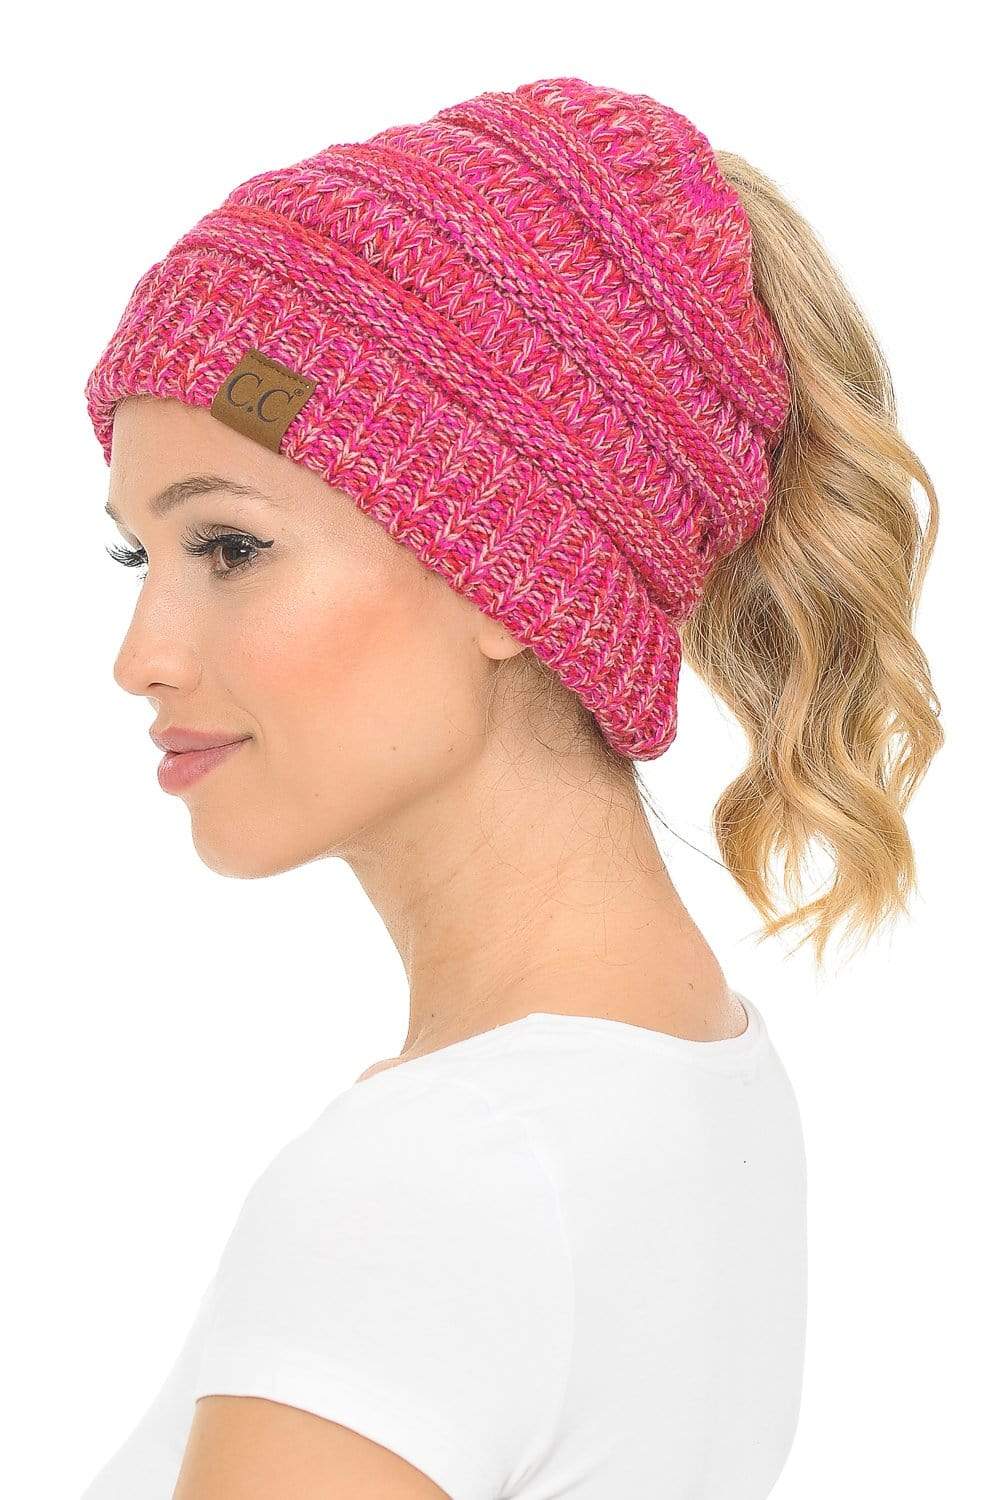 C.C Apparel 3 Tone Coral (#10) C.C MB816 - Soft Stretch Cable Knit Warm Ponytail Hat 4 Toned Mixed Multi Color Beanie